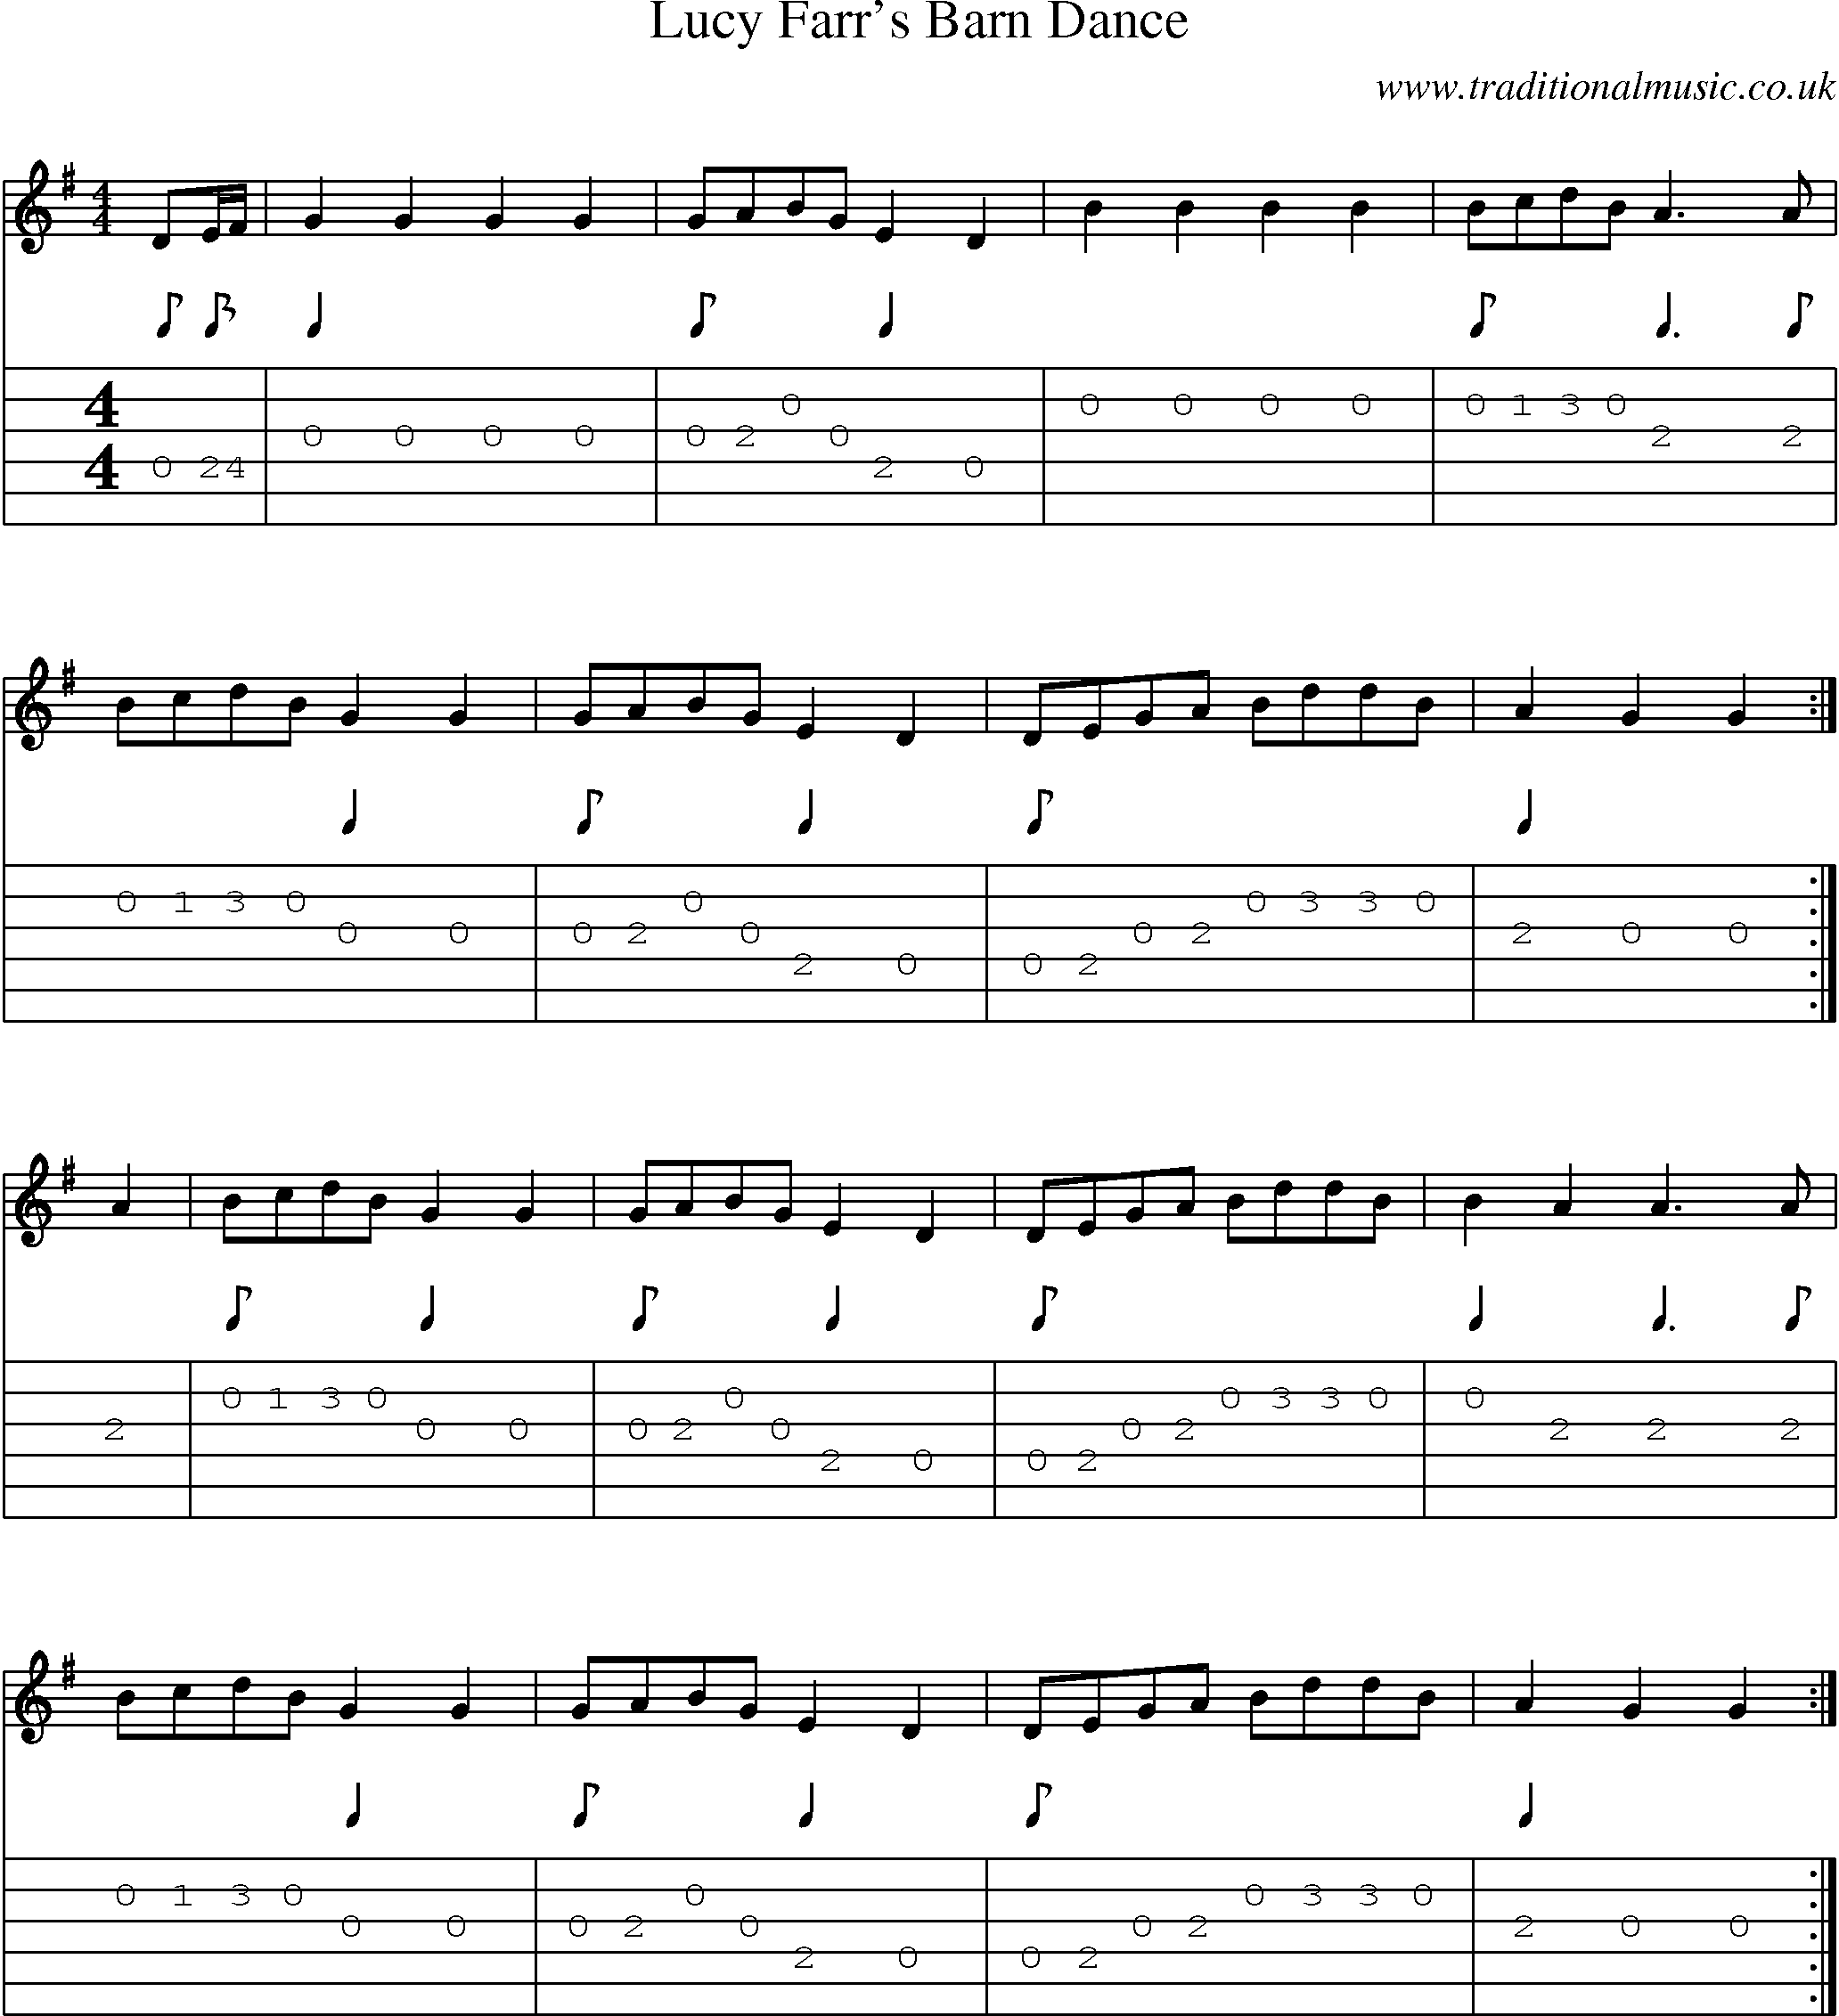 Music Score and Guitar Tabs for Lucy Farrs Barn Dance